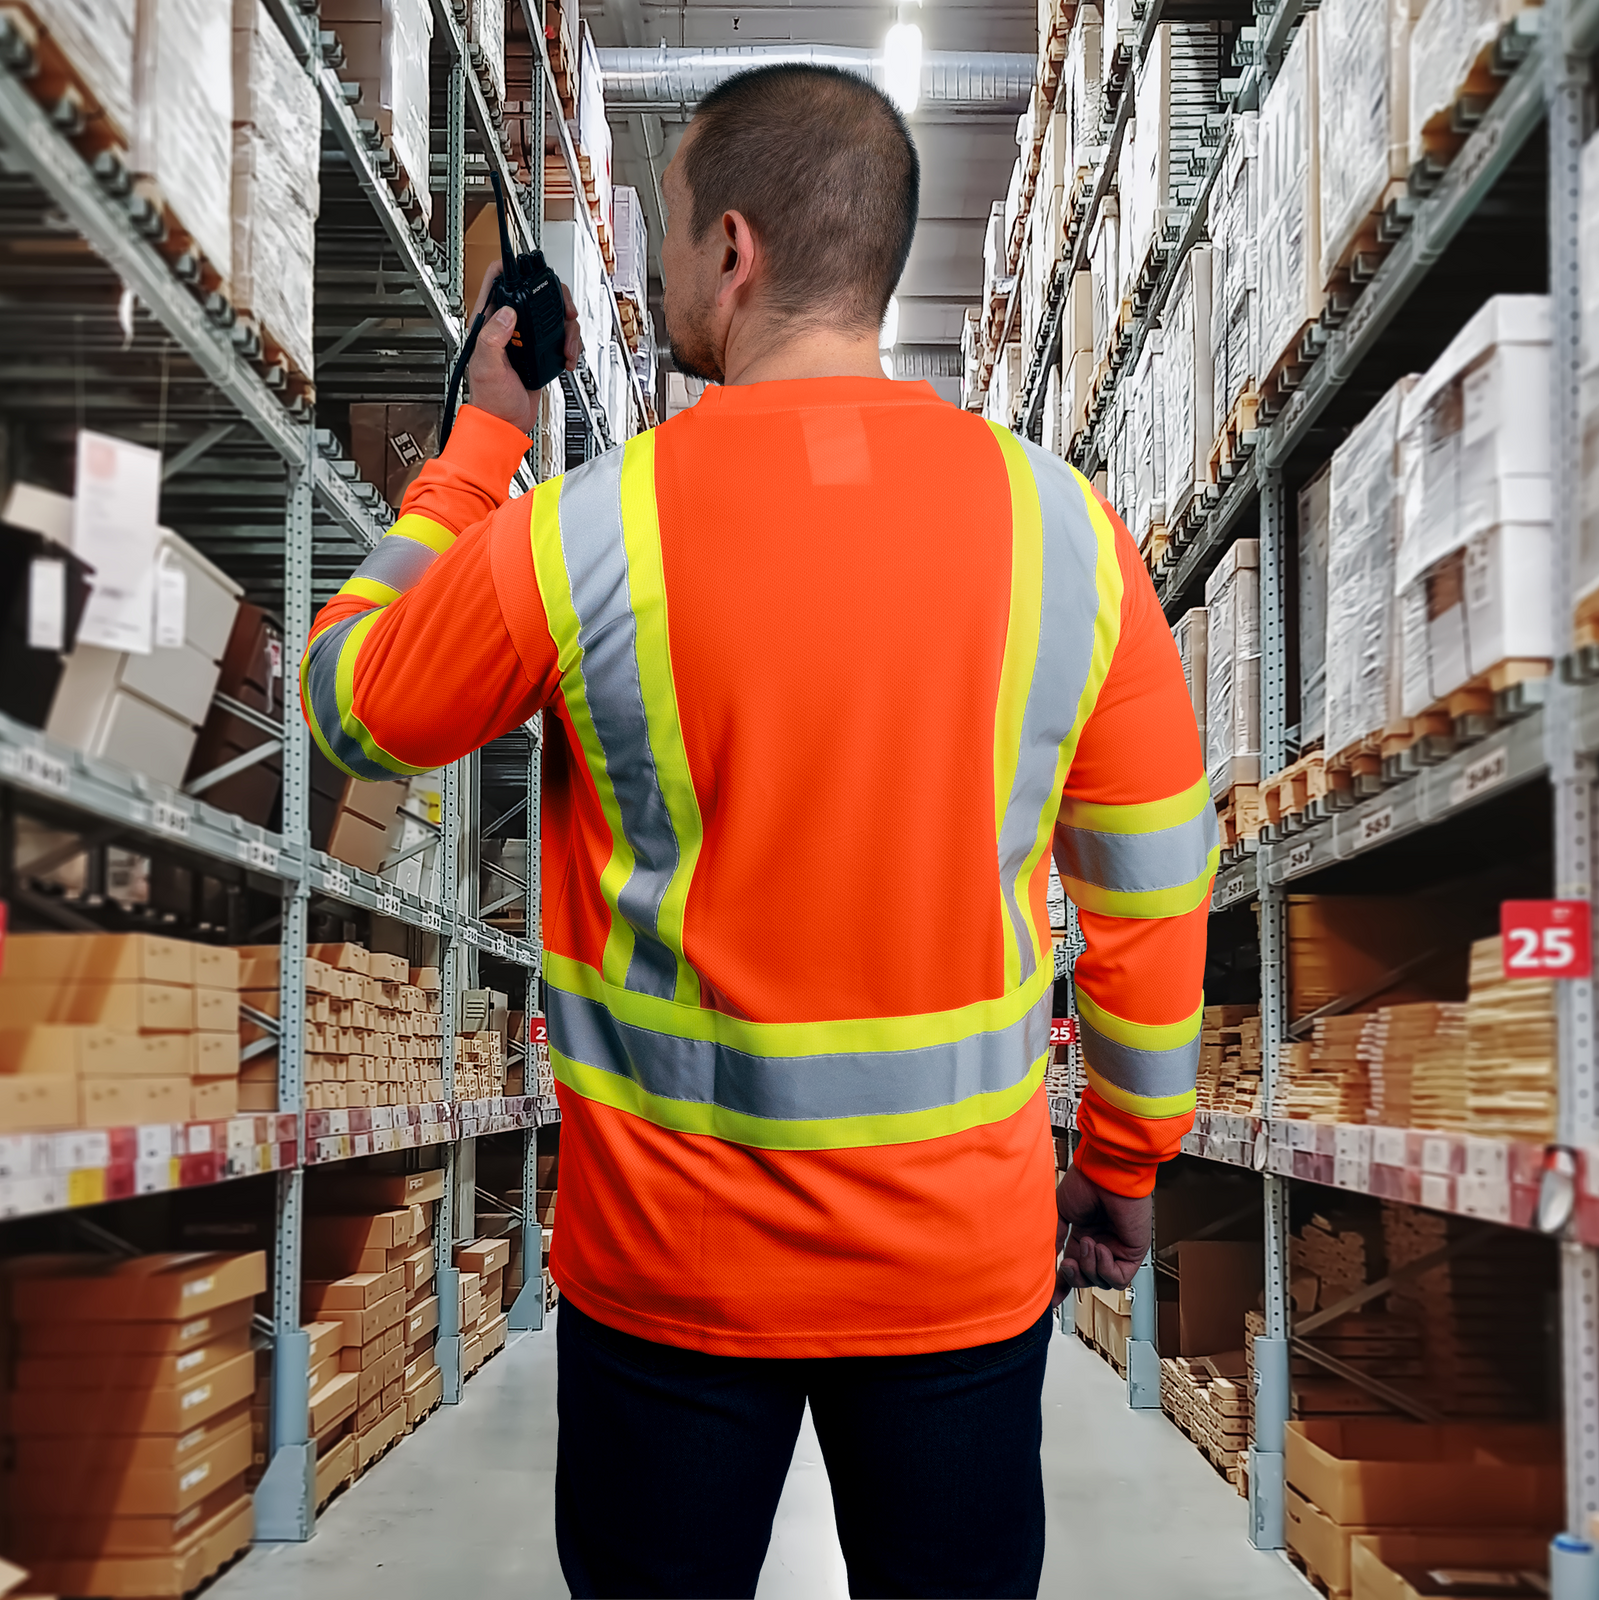 Man wearing the Orange Hi visibility safety long sleeve shirt for work inside a warehouse